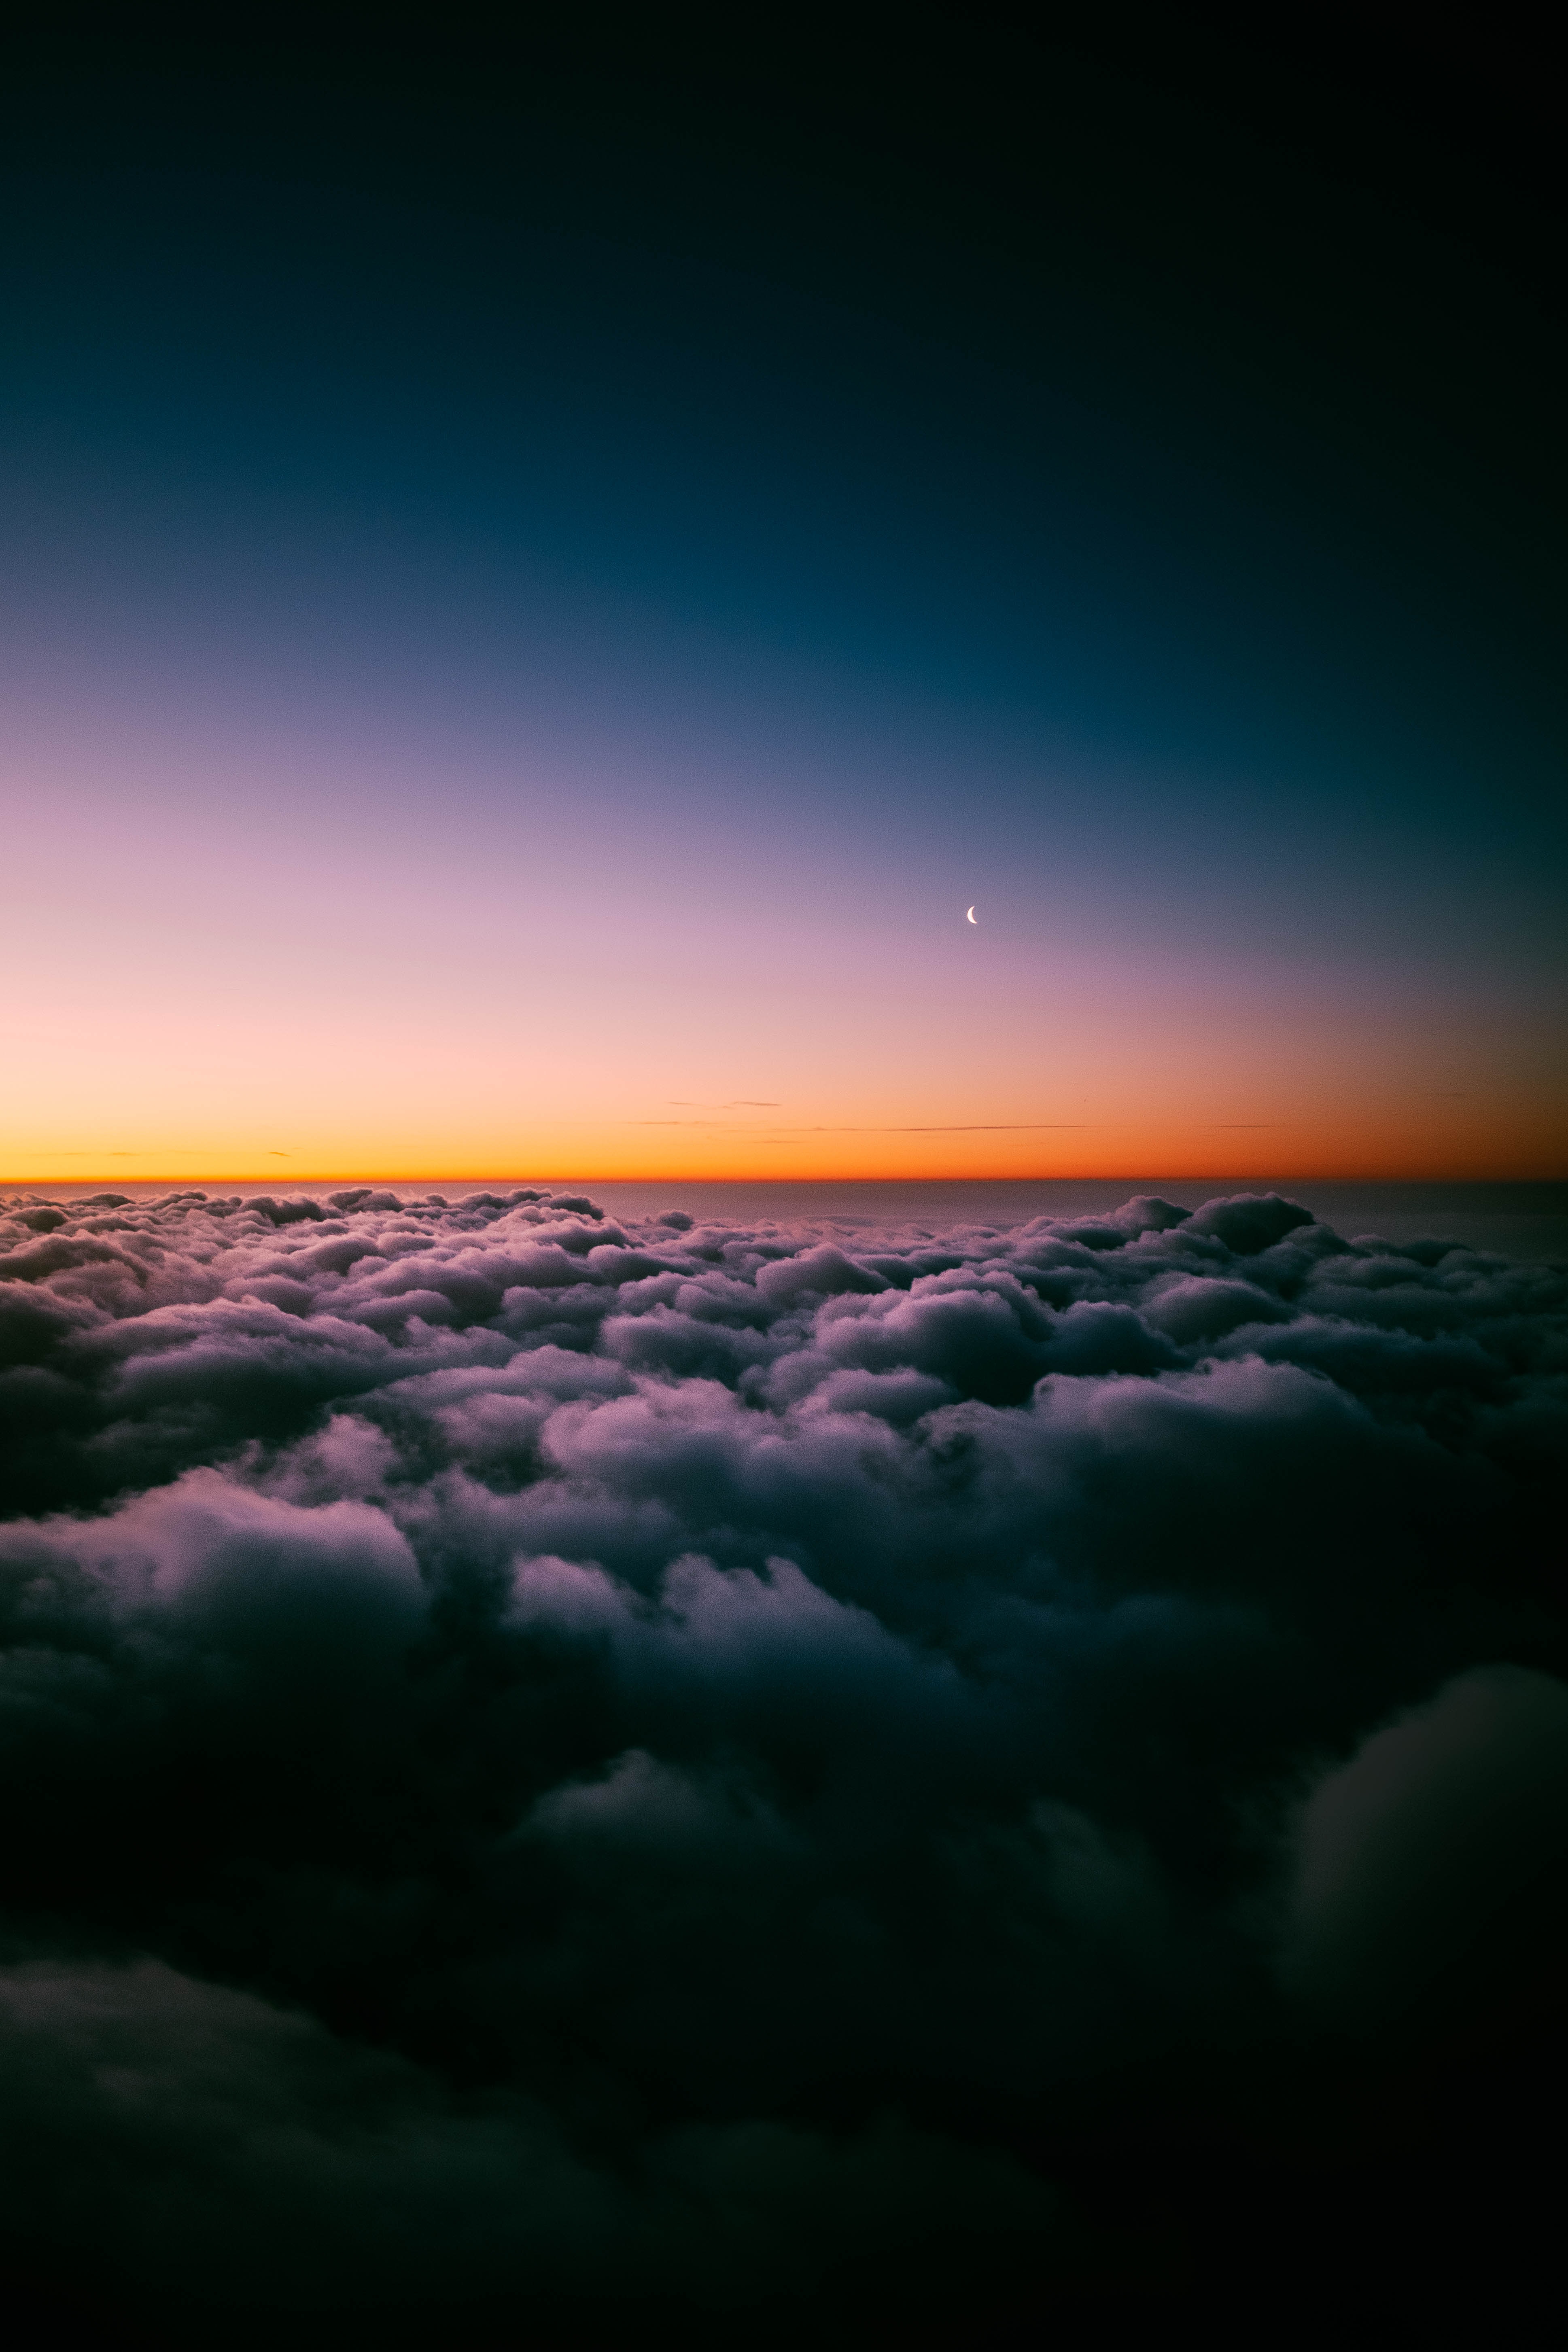 clouds, porous, above the clouds, moon, nature, sunset, twilight, dusk, sky horizon wallpapers for tablet